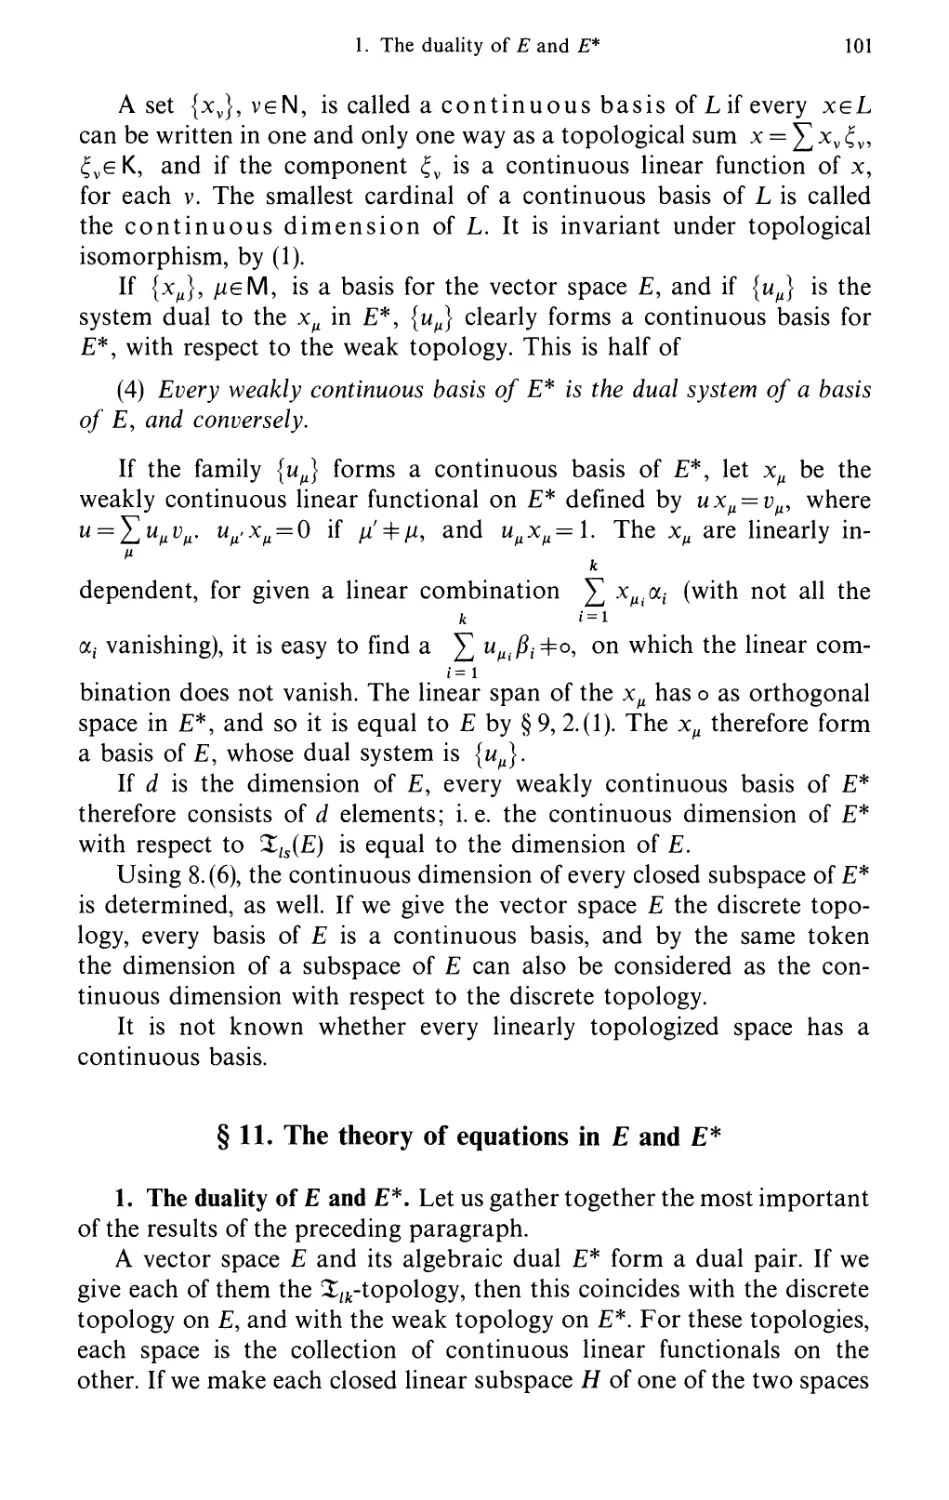 §11. The theory of equations in E and E*